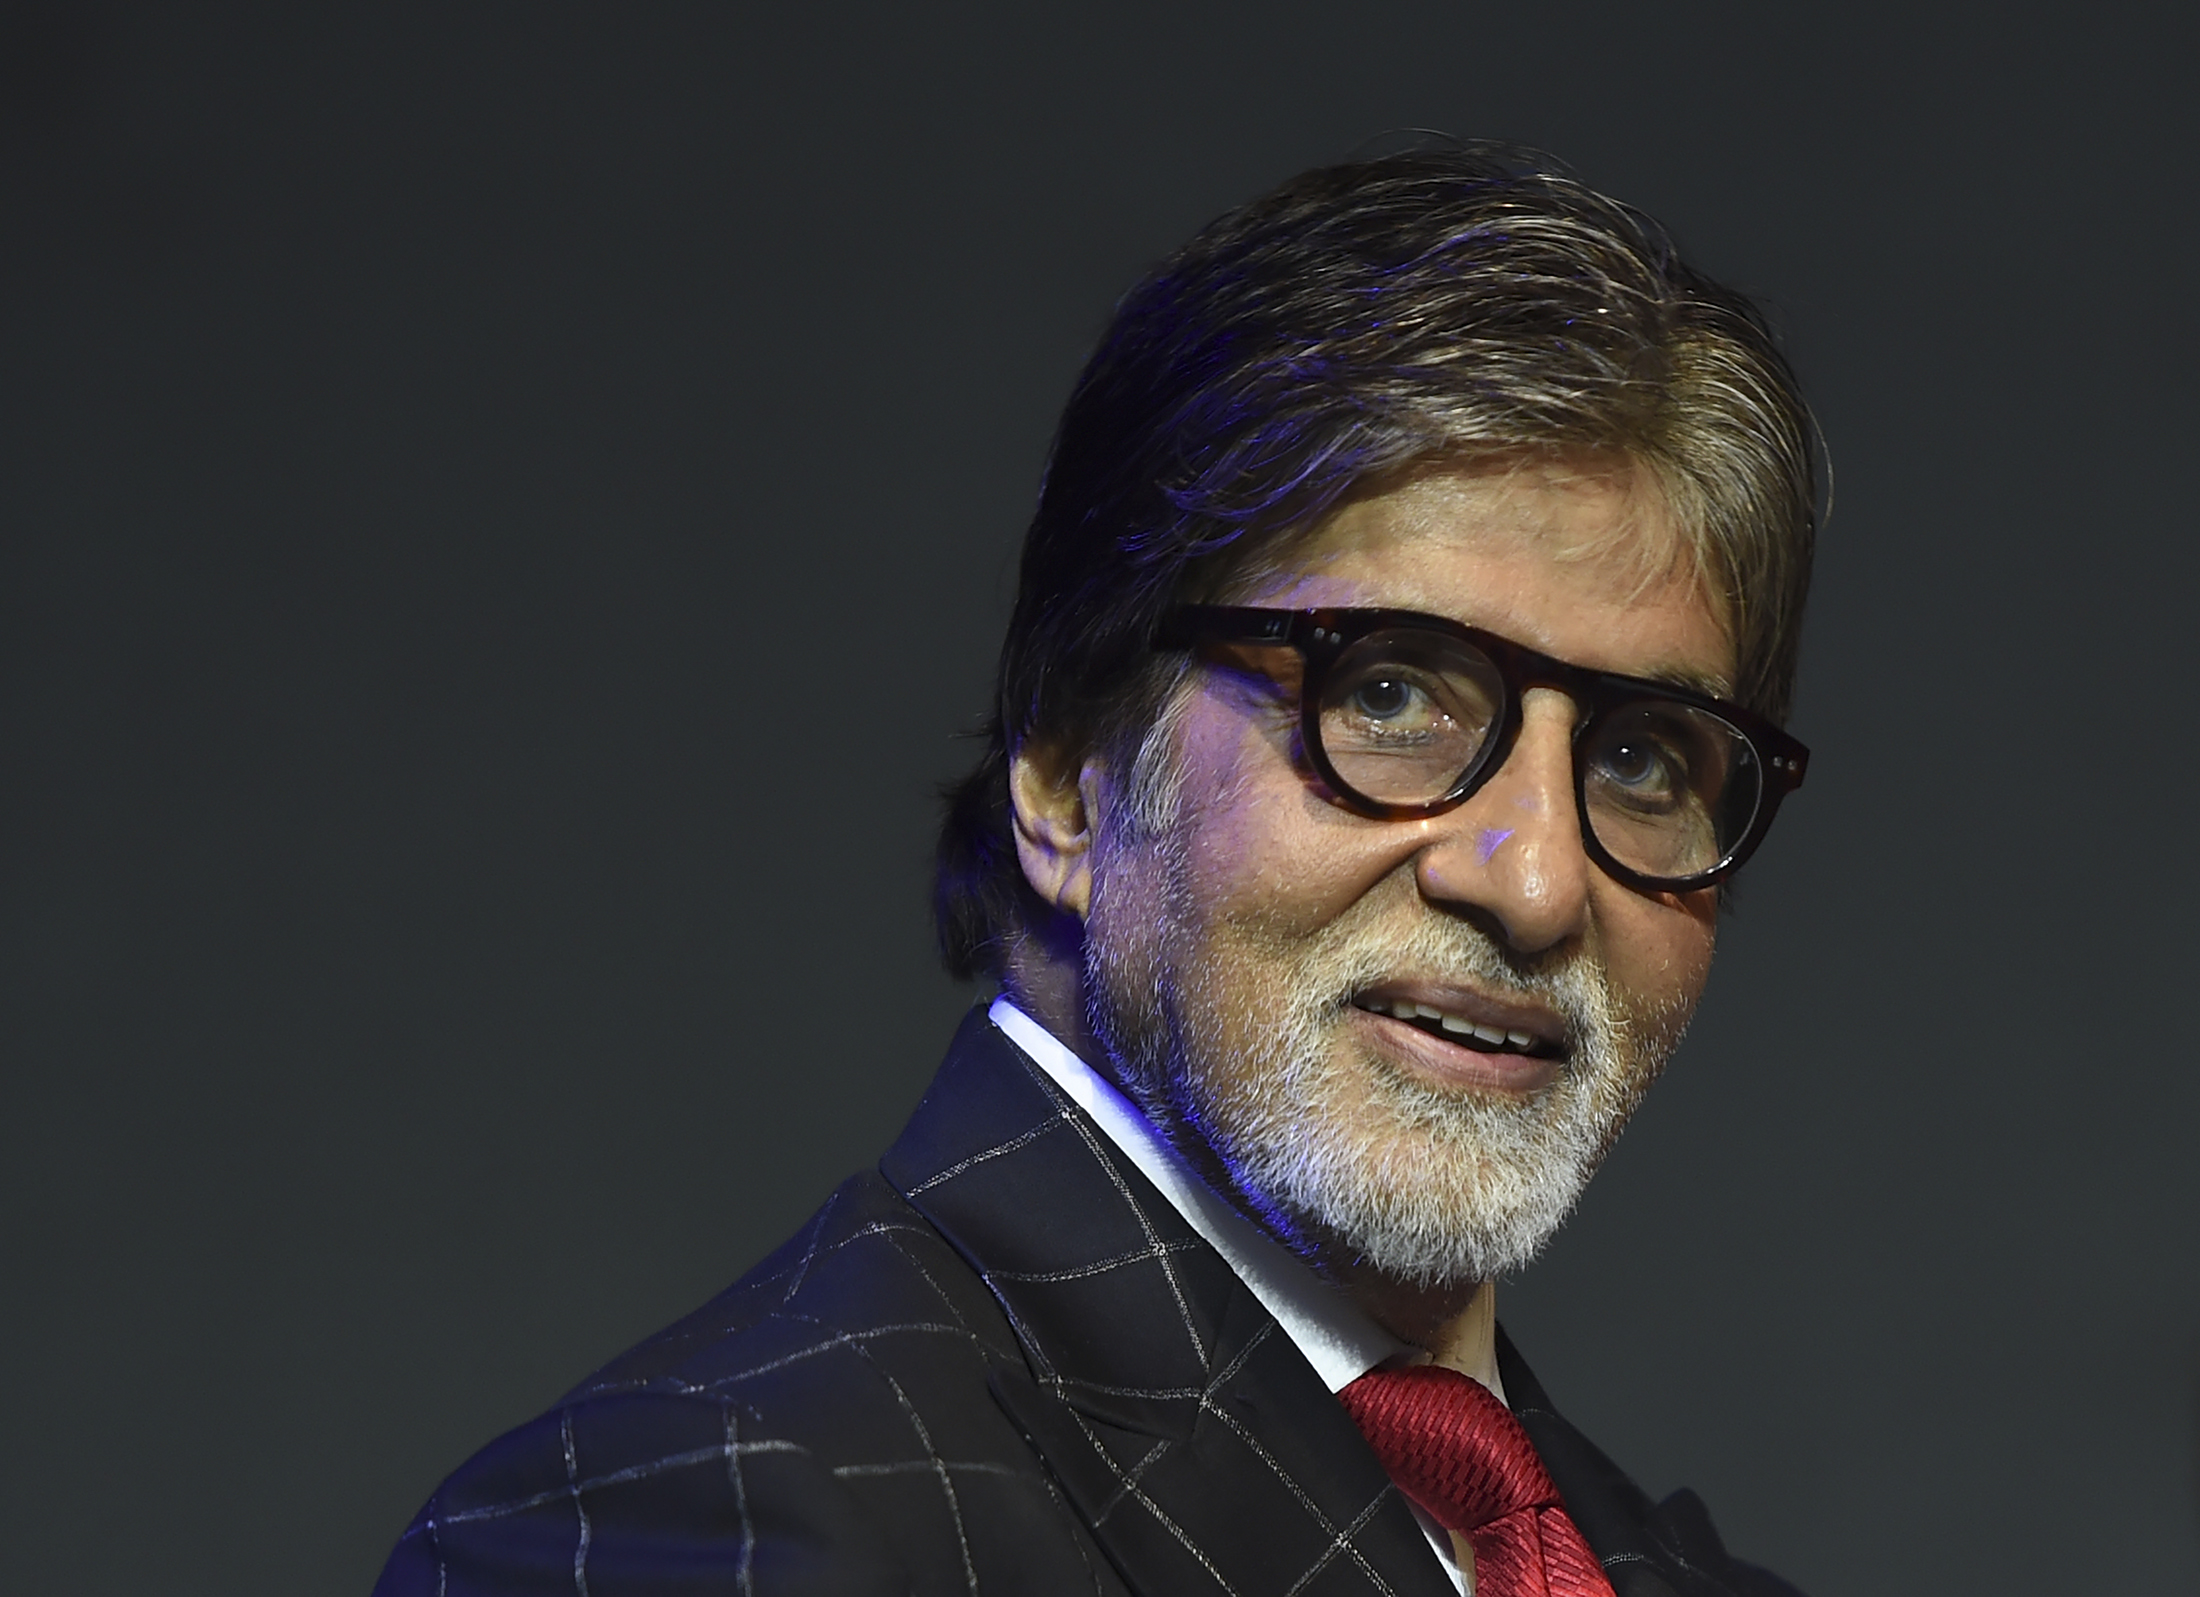 Bollywood's Amitabh Bachchan Wins Court Order for His Personality Rights -  Bloomberg